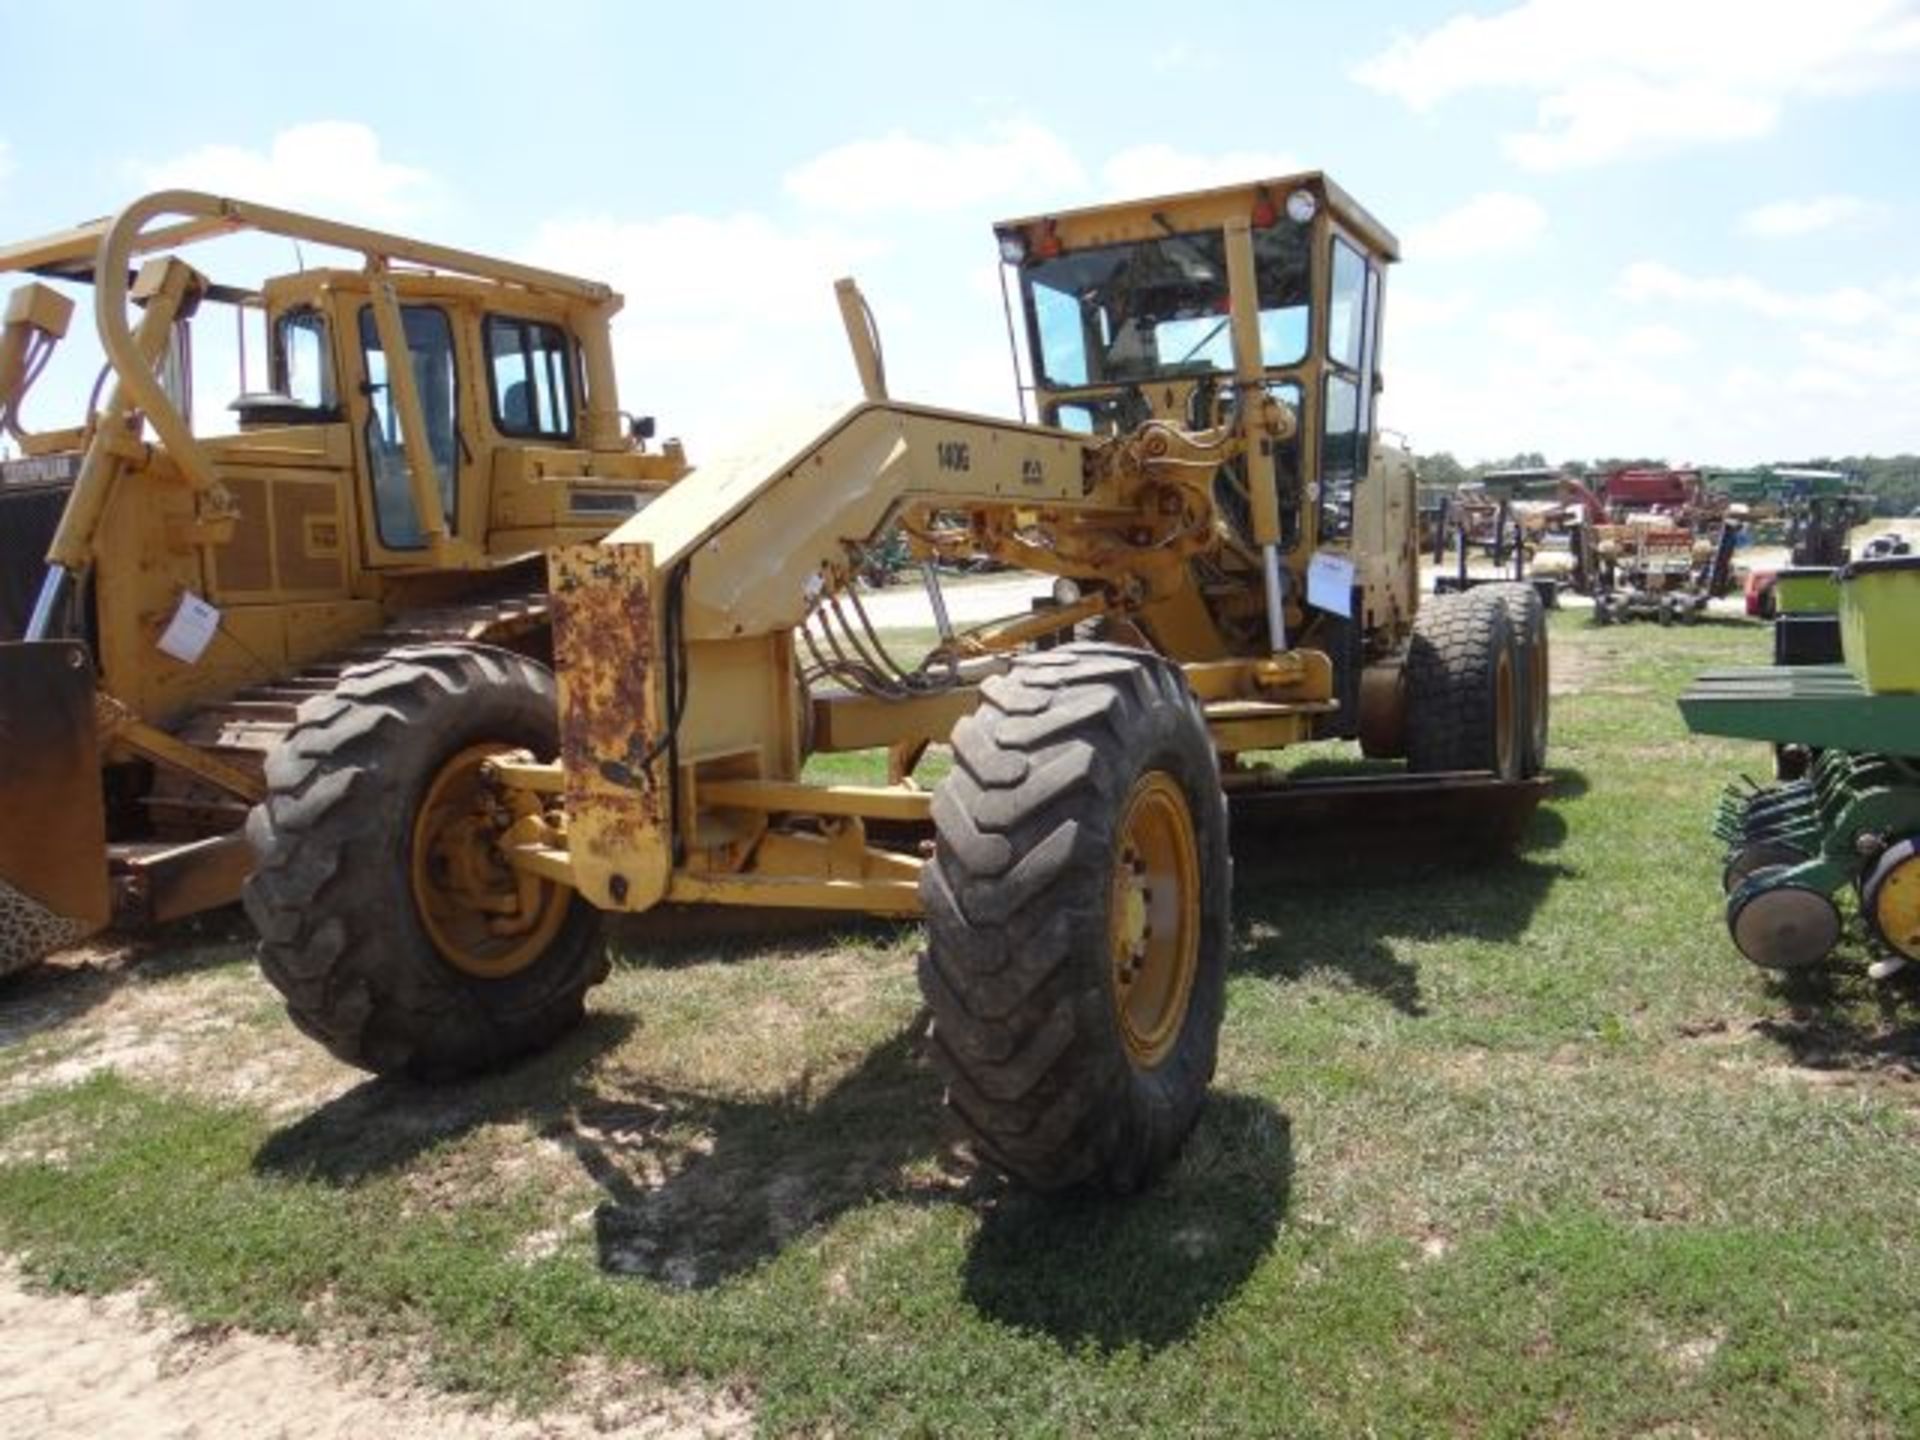 CAT 140G Road Grader, 1990 Approx 10,500 hrs, Tach has Been Replaced, One Owner, Starts and Runs - Image 2 of 3